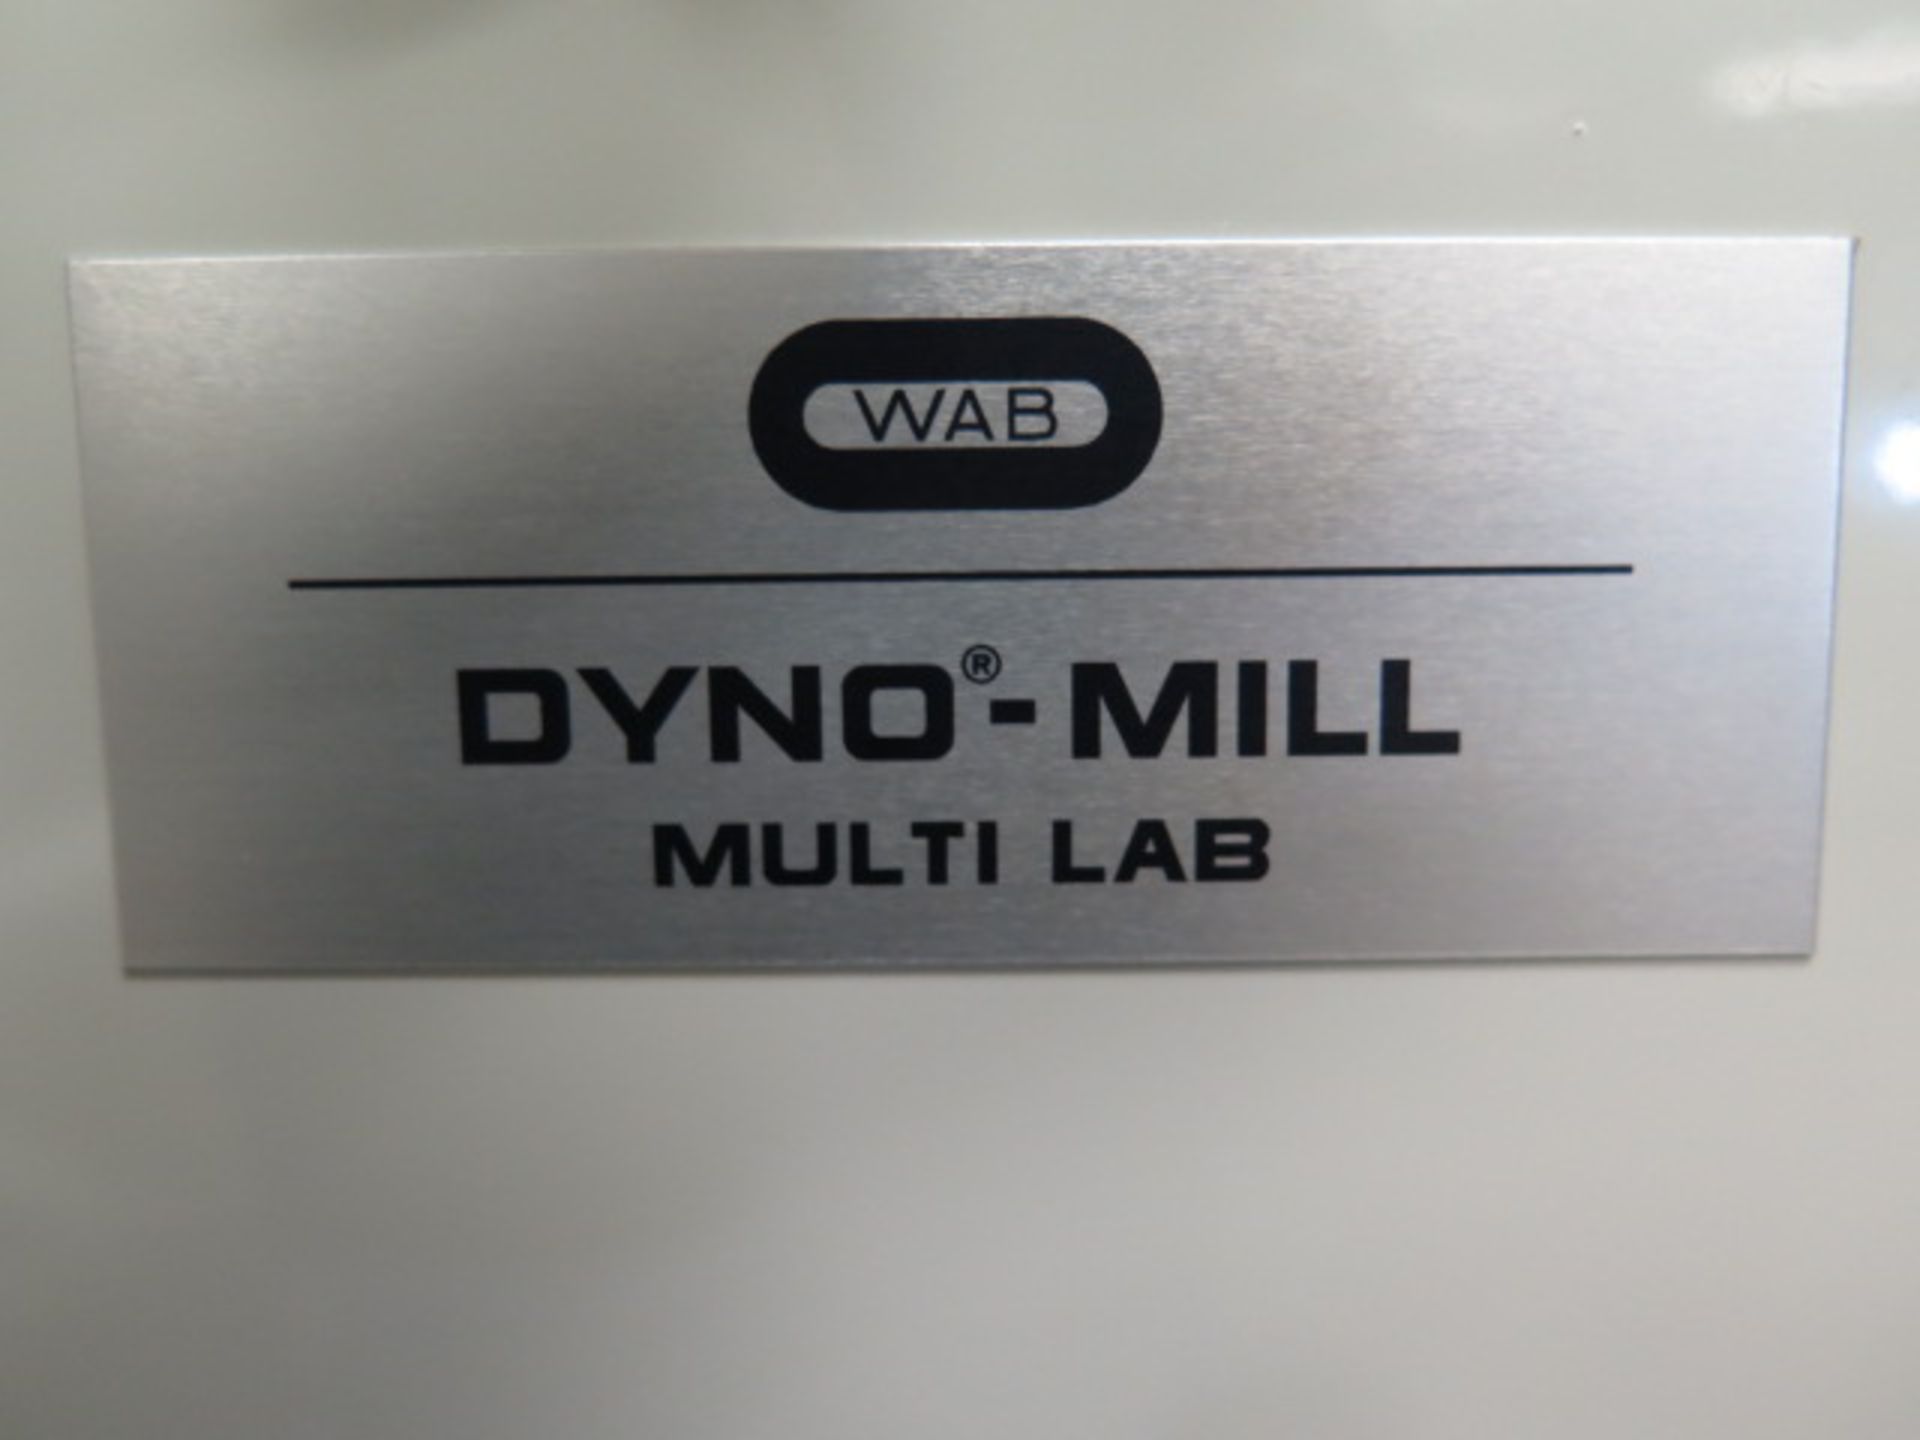 WAB (Willy A Bachofer) “Dyno-Mill Multi Lab” Ball Mill s/n 111075 w/ Digital Controls, SOLD AS IS - Image 13 of 14